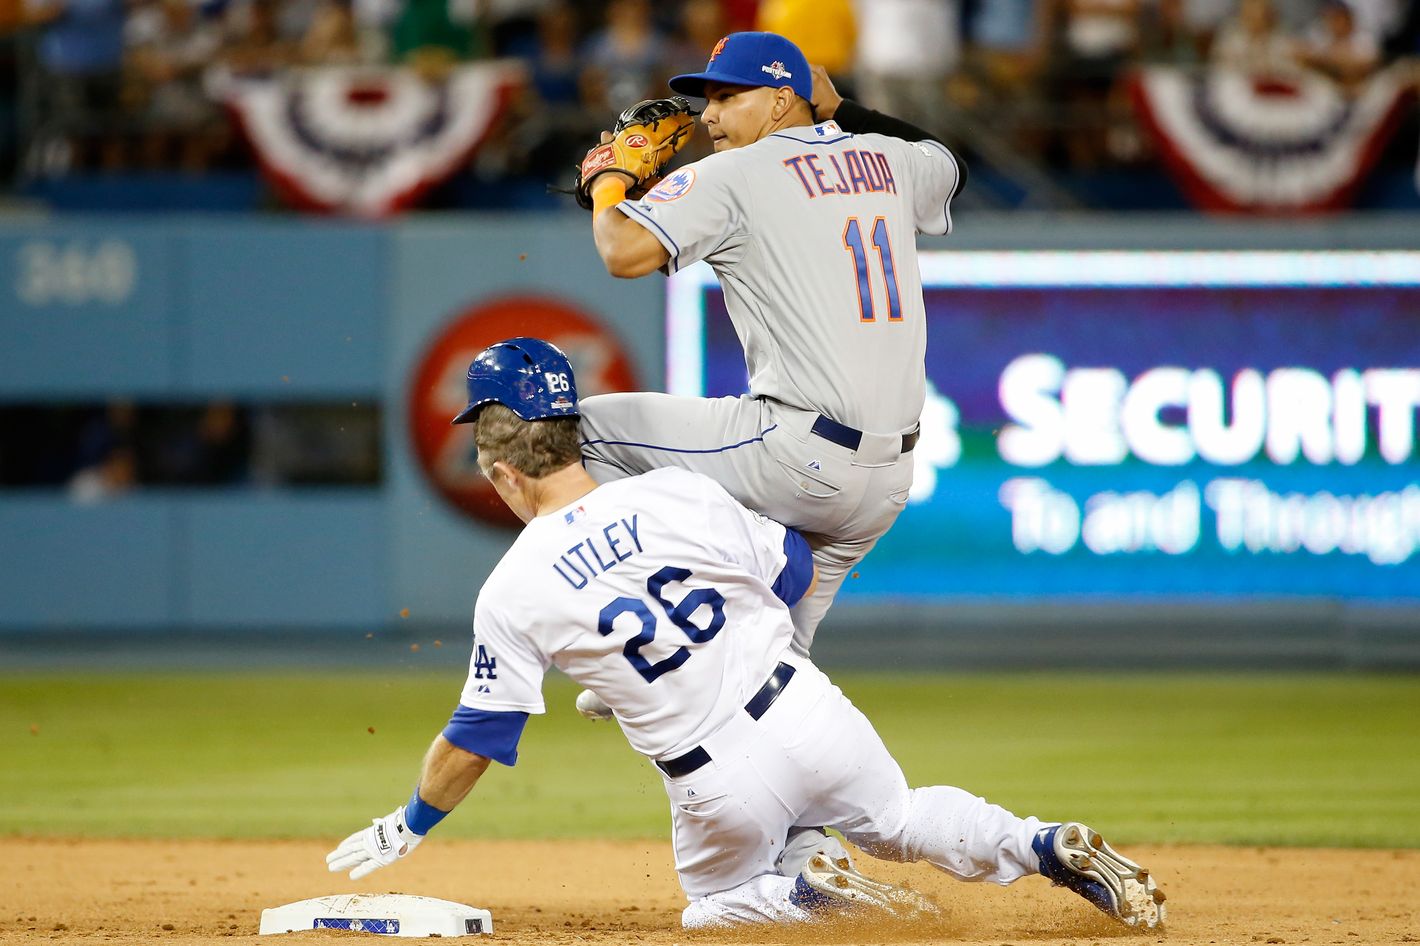 Why don't baseball batters slide into first base when they hit the ball  into play? - Quora